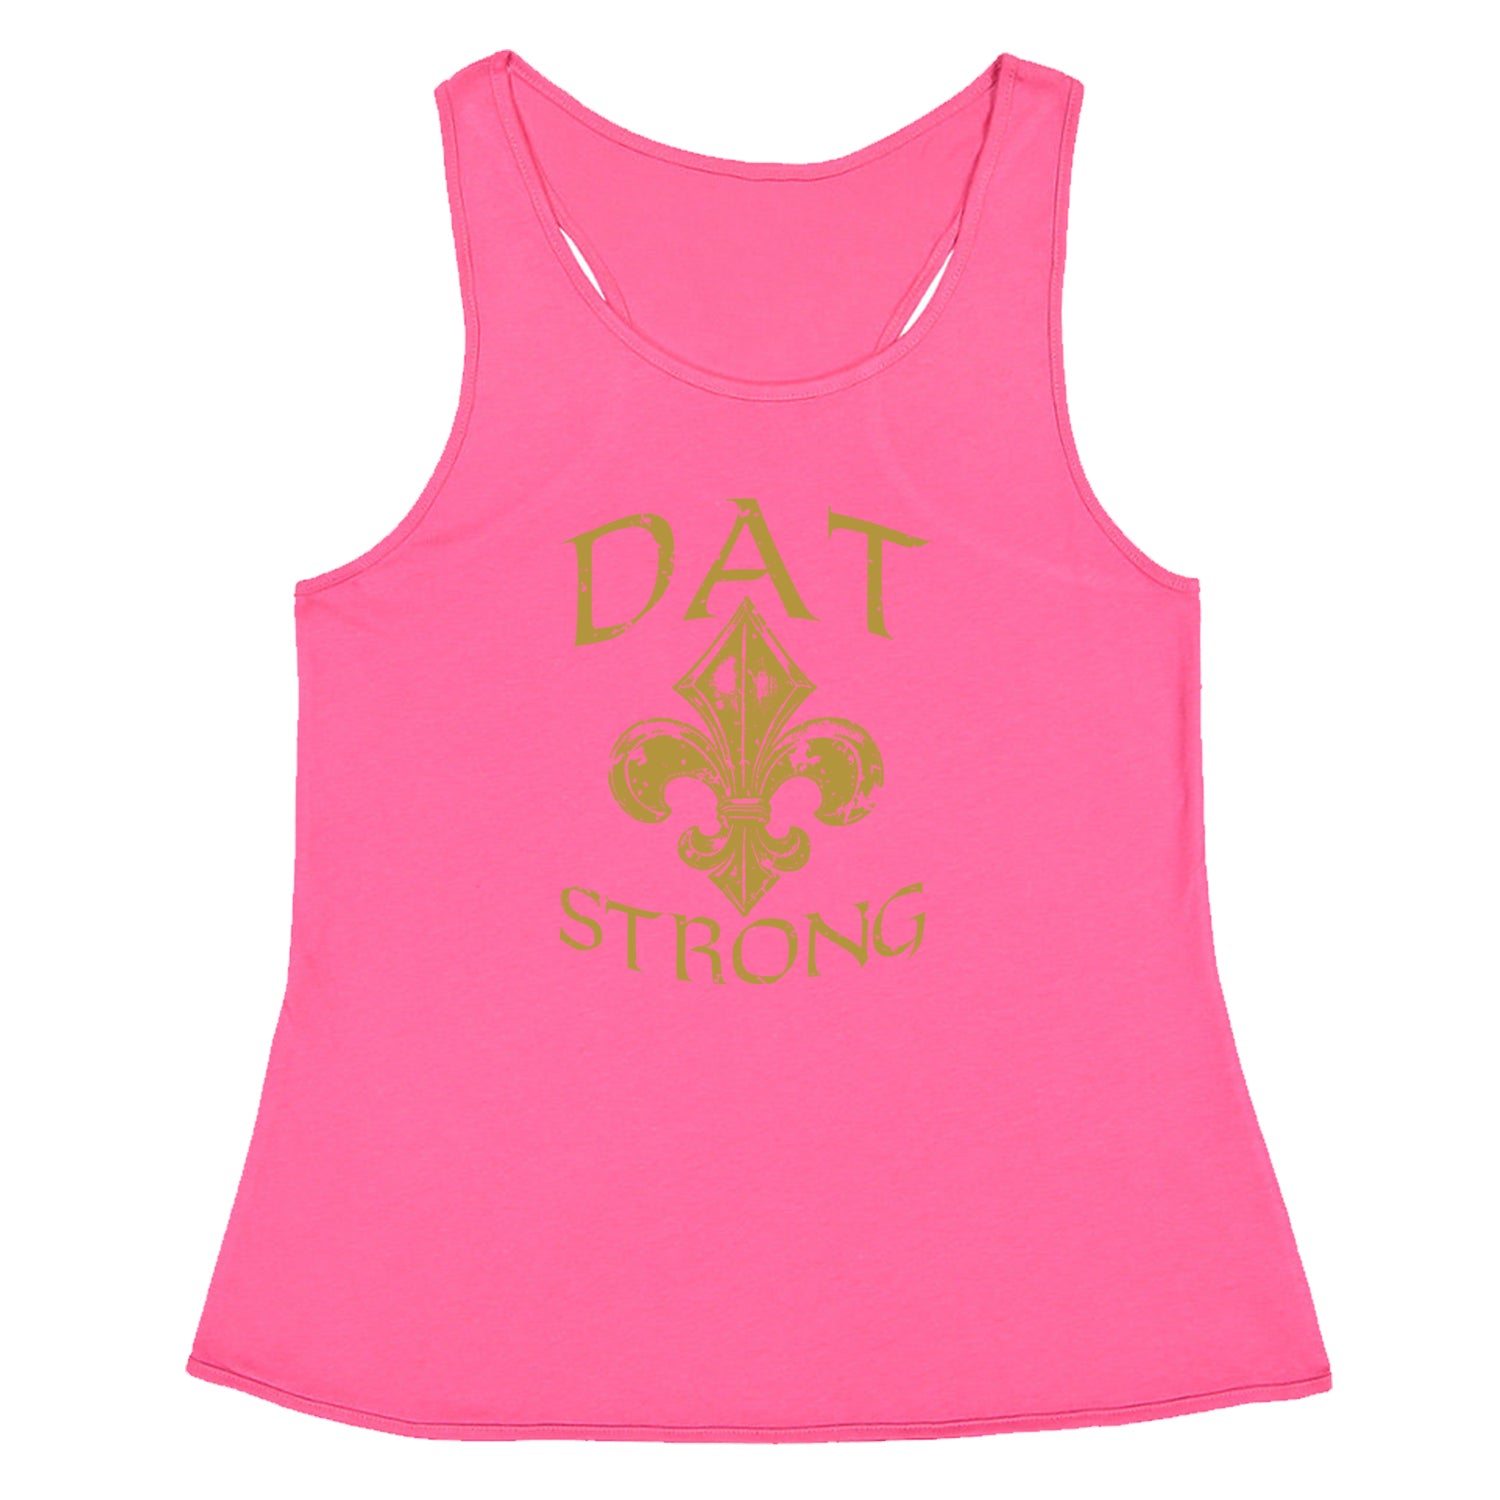 Dat Strong New Orleans Racerback Tank Top for Women dat, de, fan, fleur, jersey, lis, new, orleans, sports, strong, who by Expression Tees